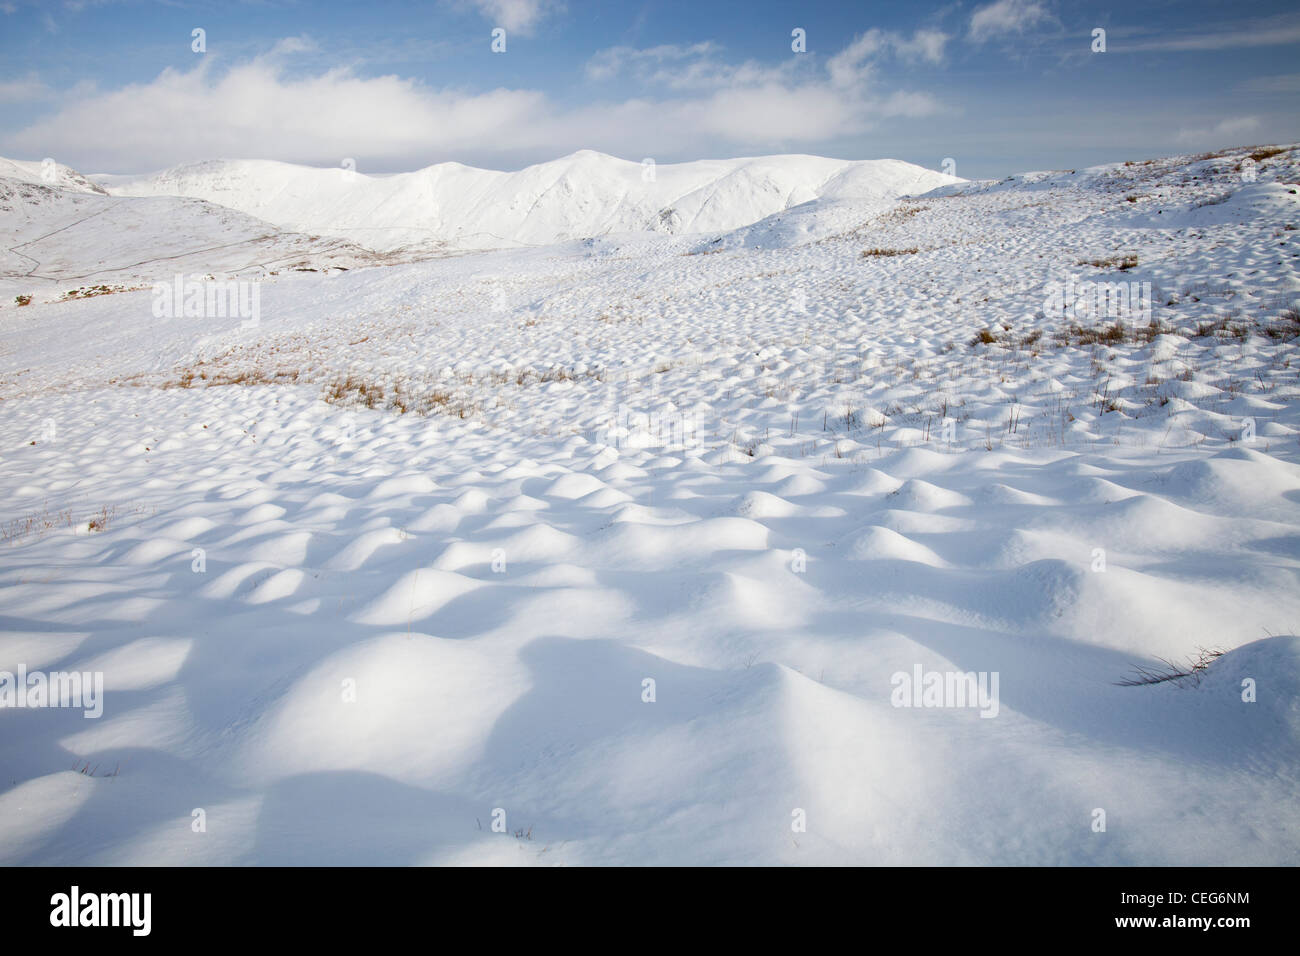 Snowy hummocks on Wansfell above Ambleside in the Lake District, UK, looking towards the Kentmere fells. Stock Photo